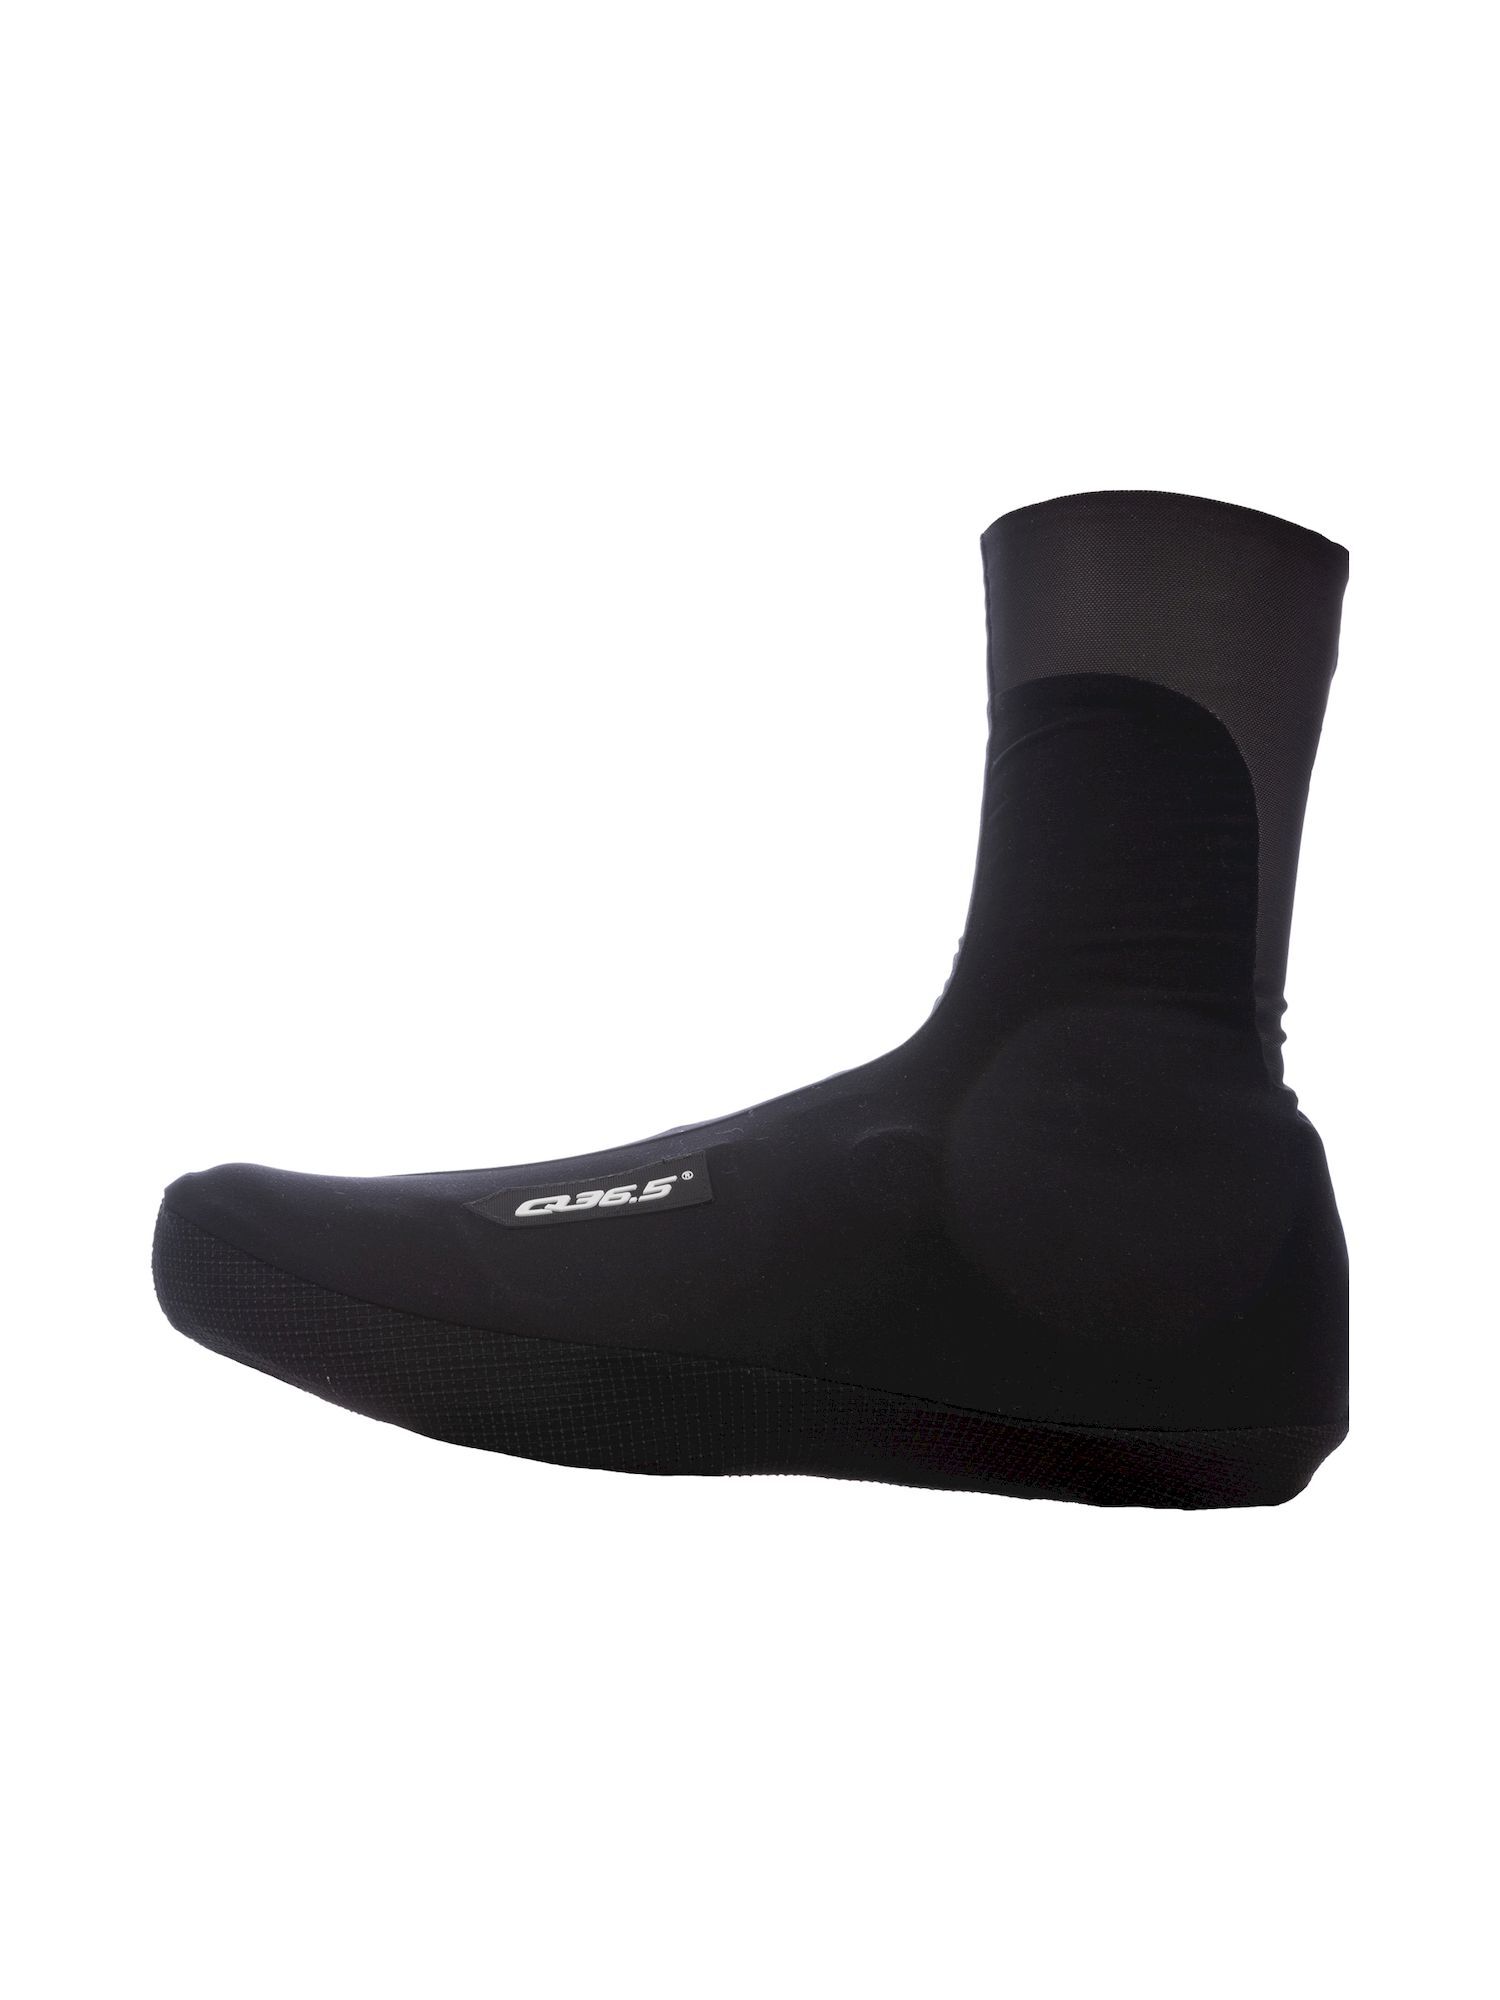 Q36.5 Hybrid Overshoes - Sur-chaussures vélo | Hardloop